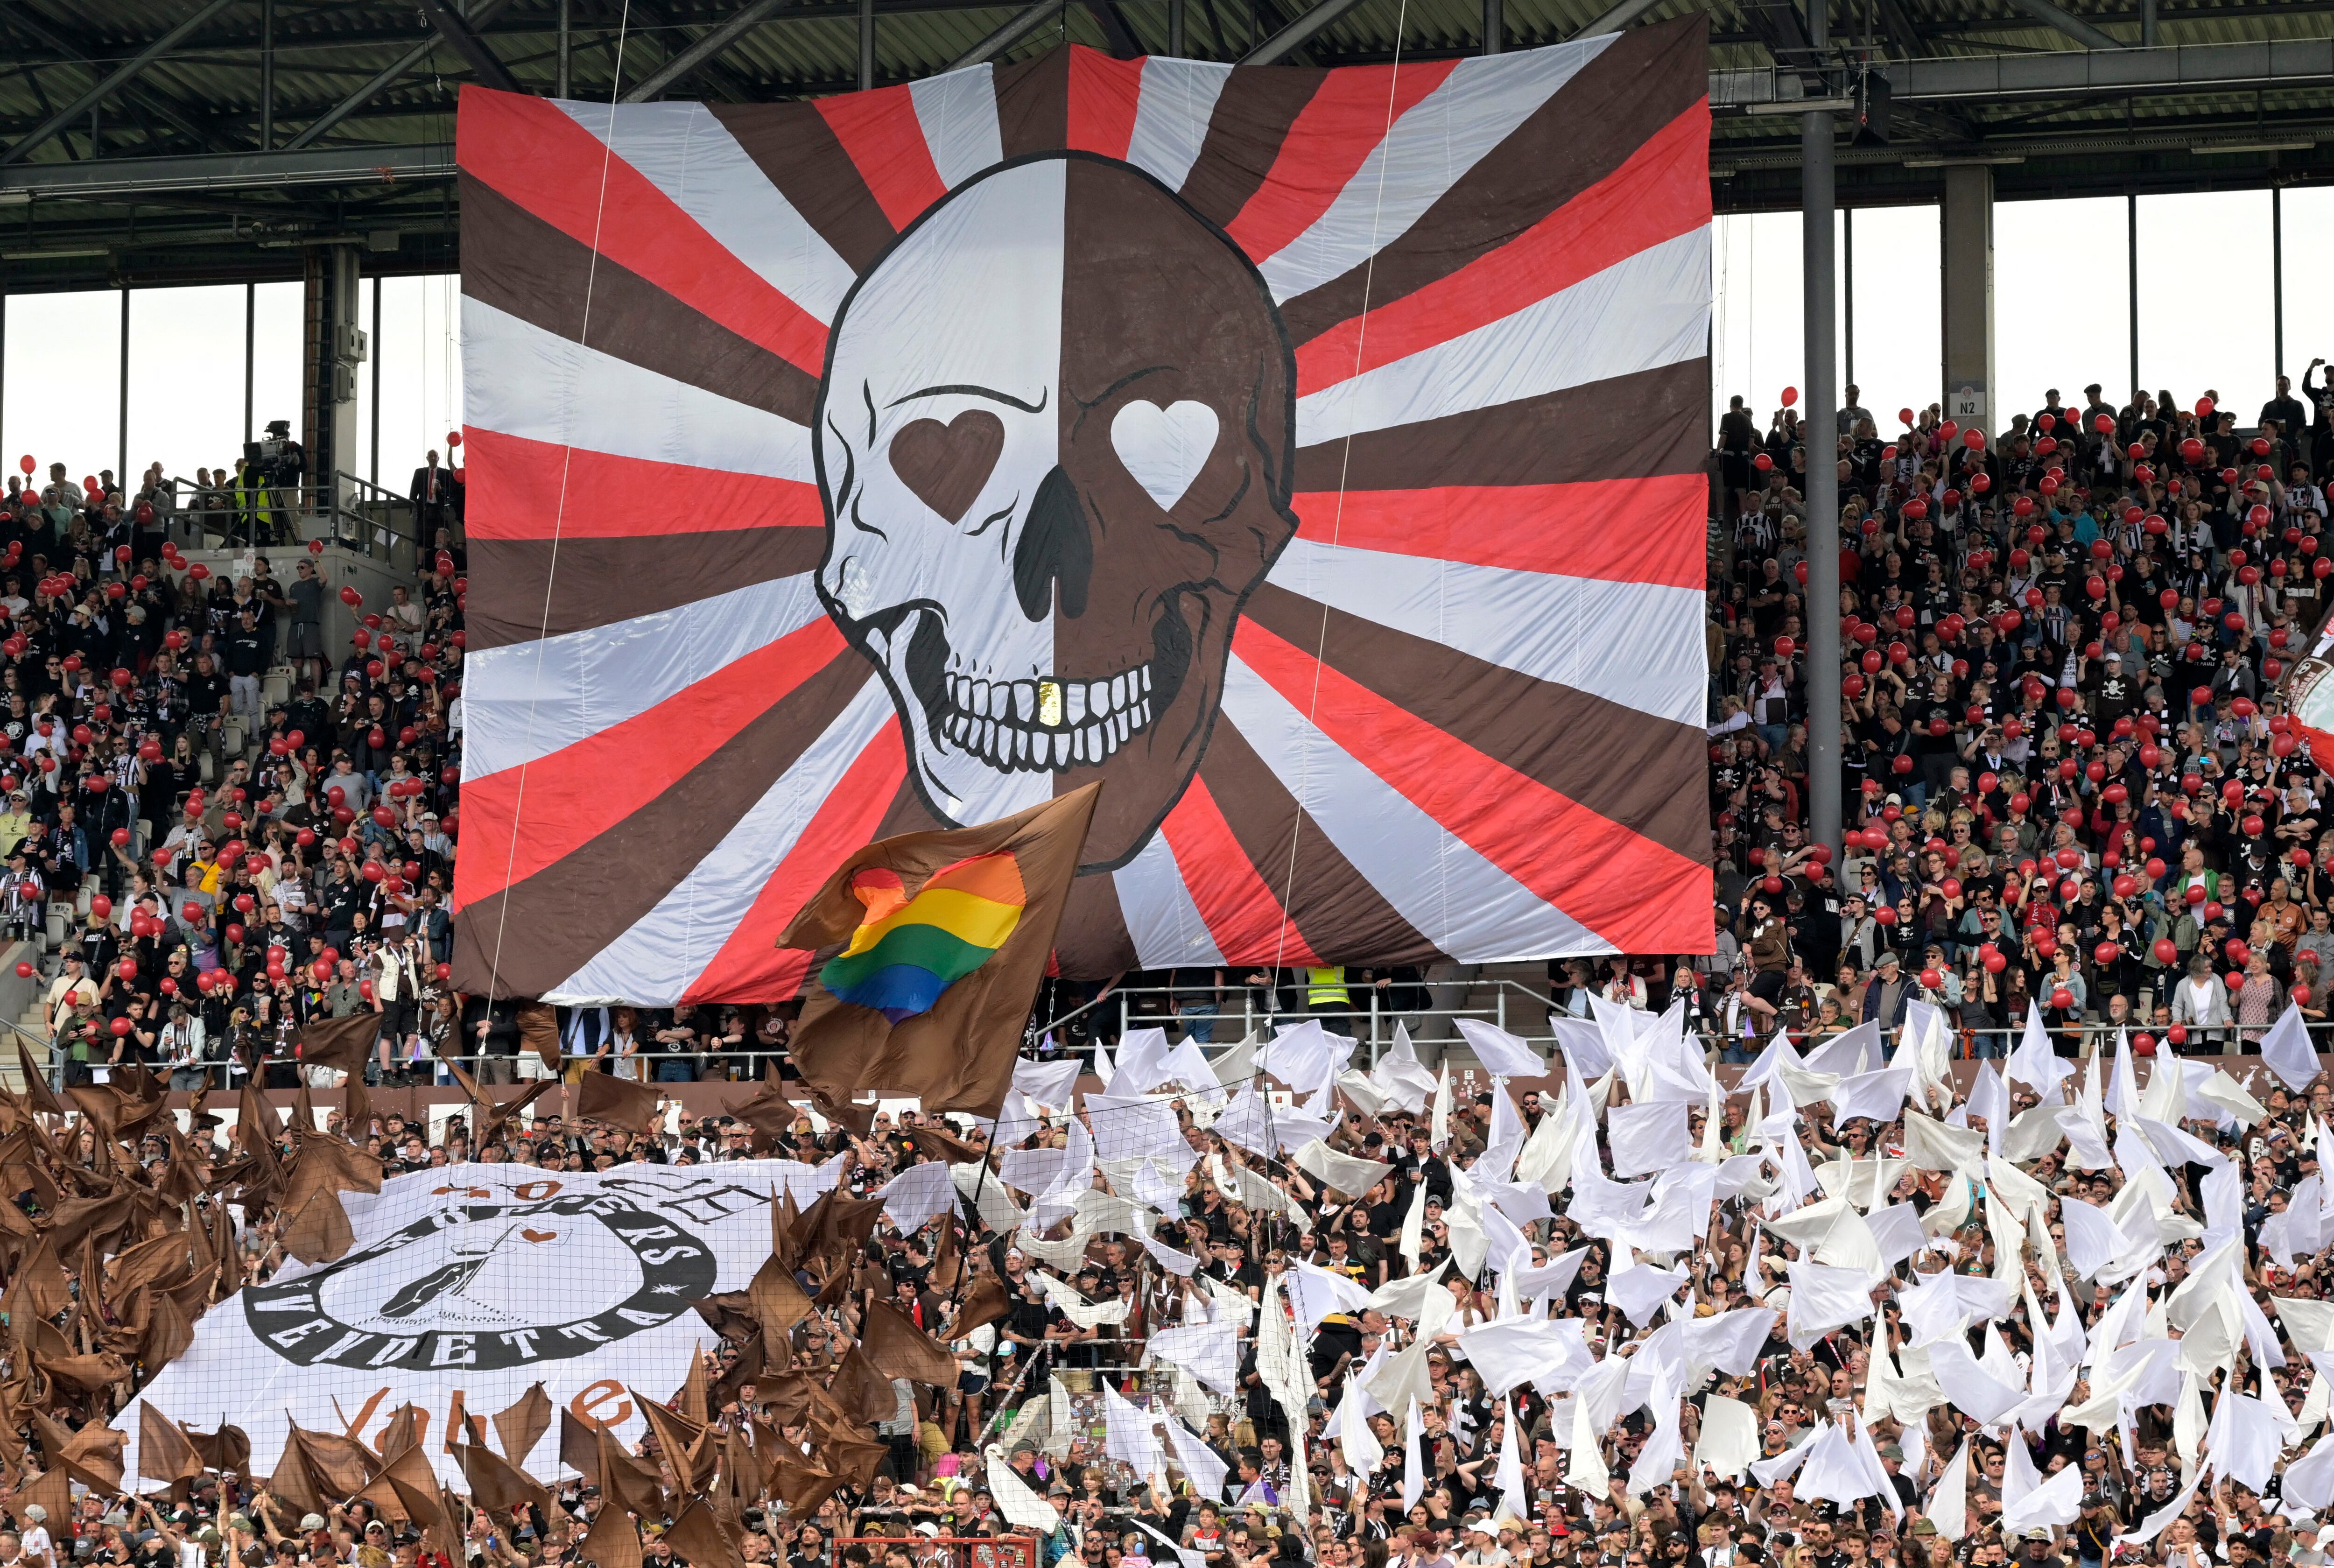 St. Pauli fans display their flags before a match on May 12.